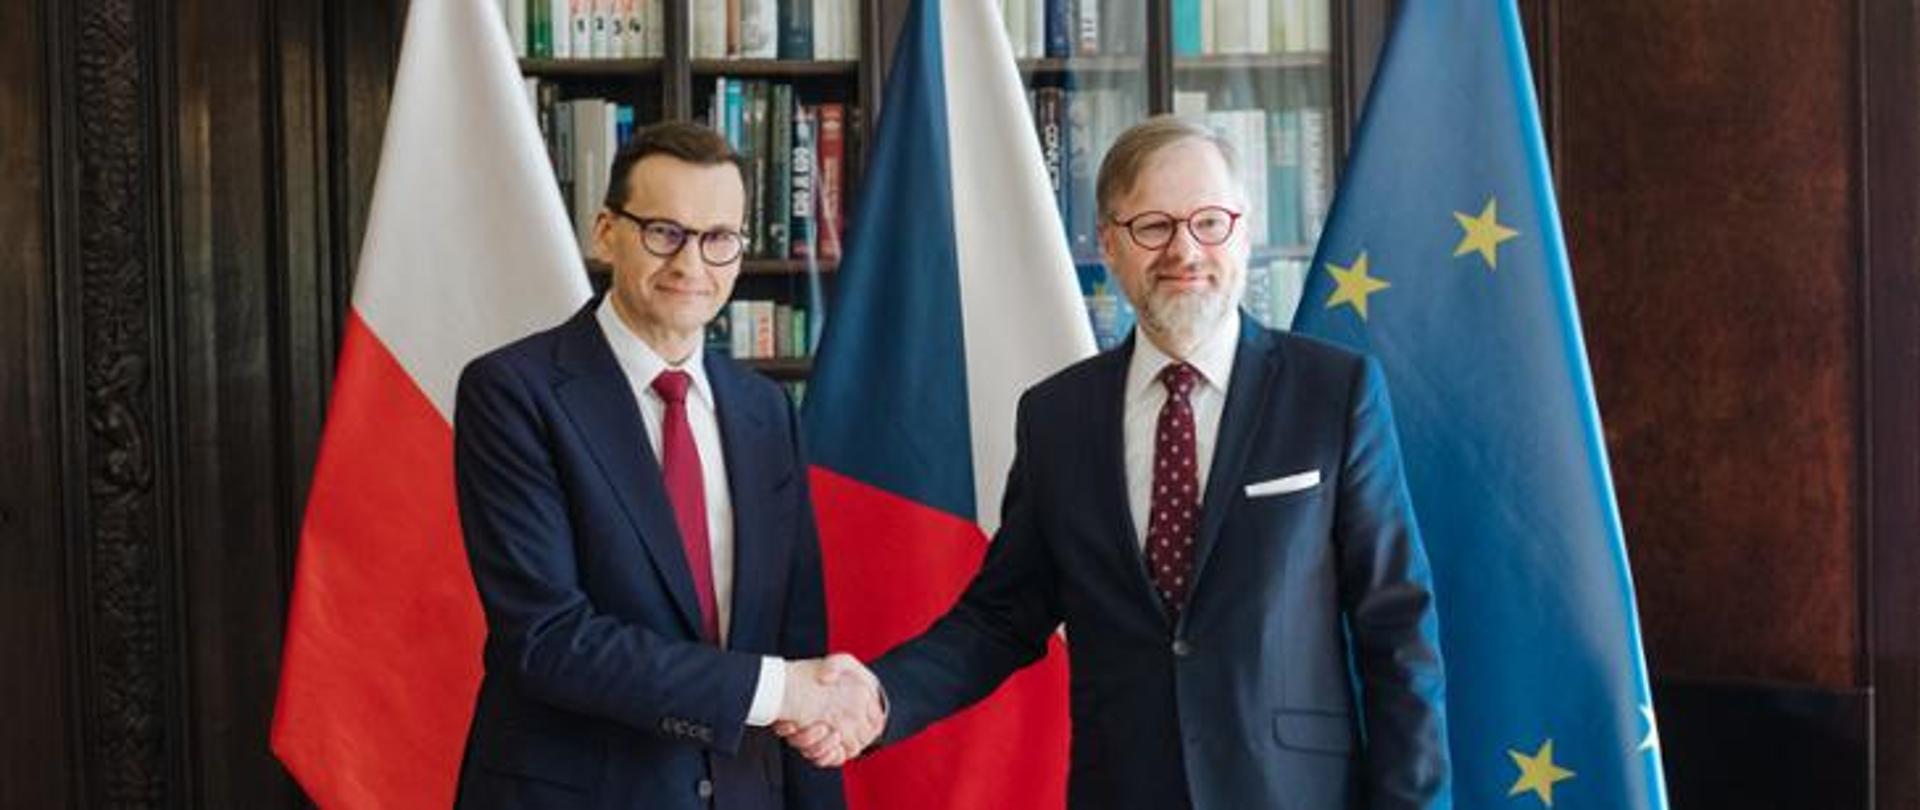 Prime Minister Mateusz Morawiecki and Prime Minister of the Czech Republic Petr Fiala during the visit of the Polish Prime Minister to Prague as part of intergovernmental consultations